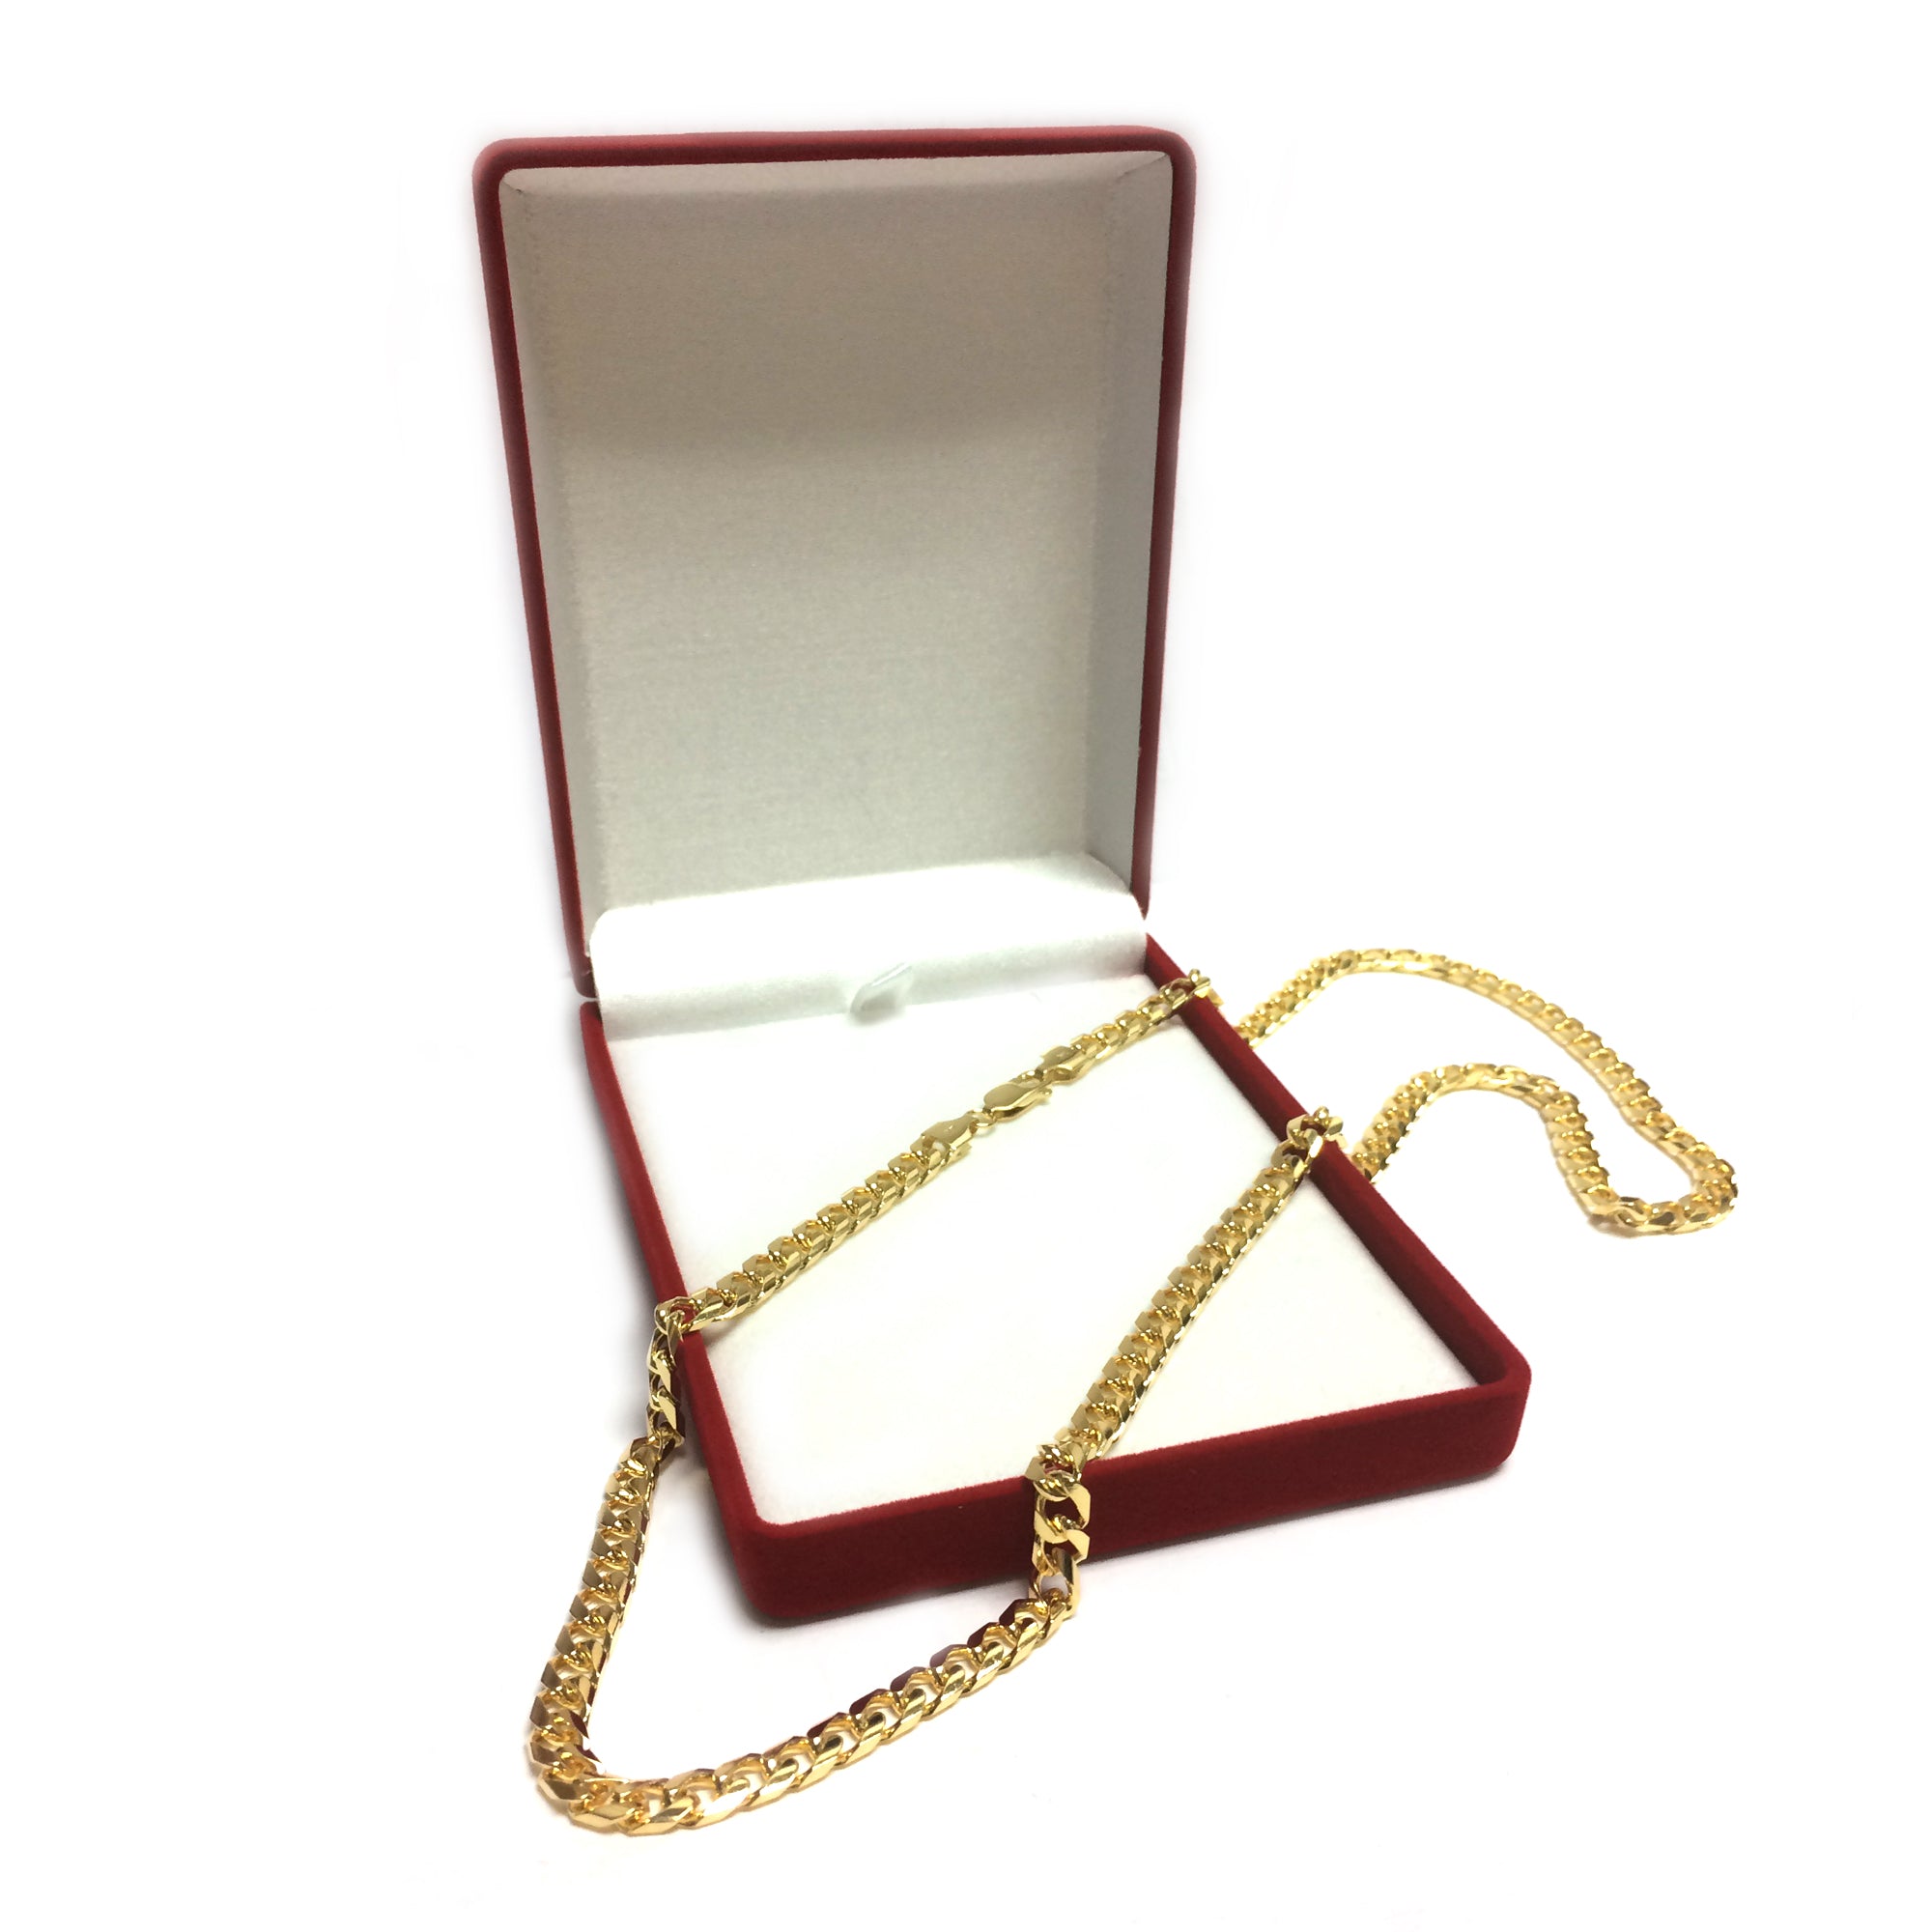 14k Yellow Gold Miami Cuban Link Chain Necklace, Width 4.4mm fine designer jewelry for men and women